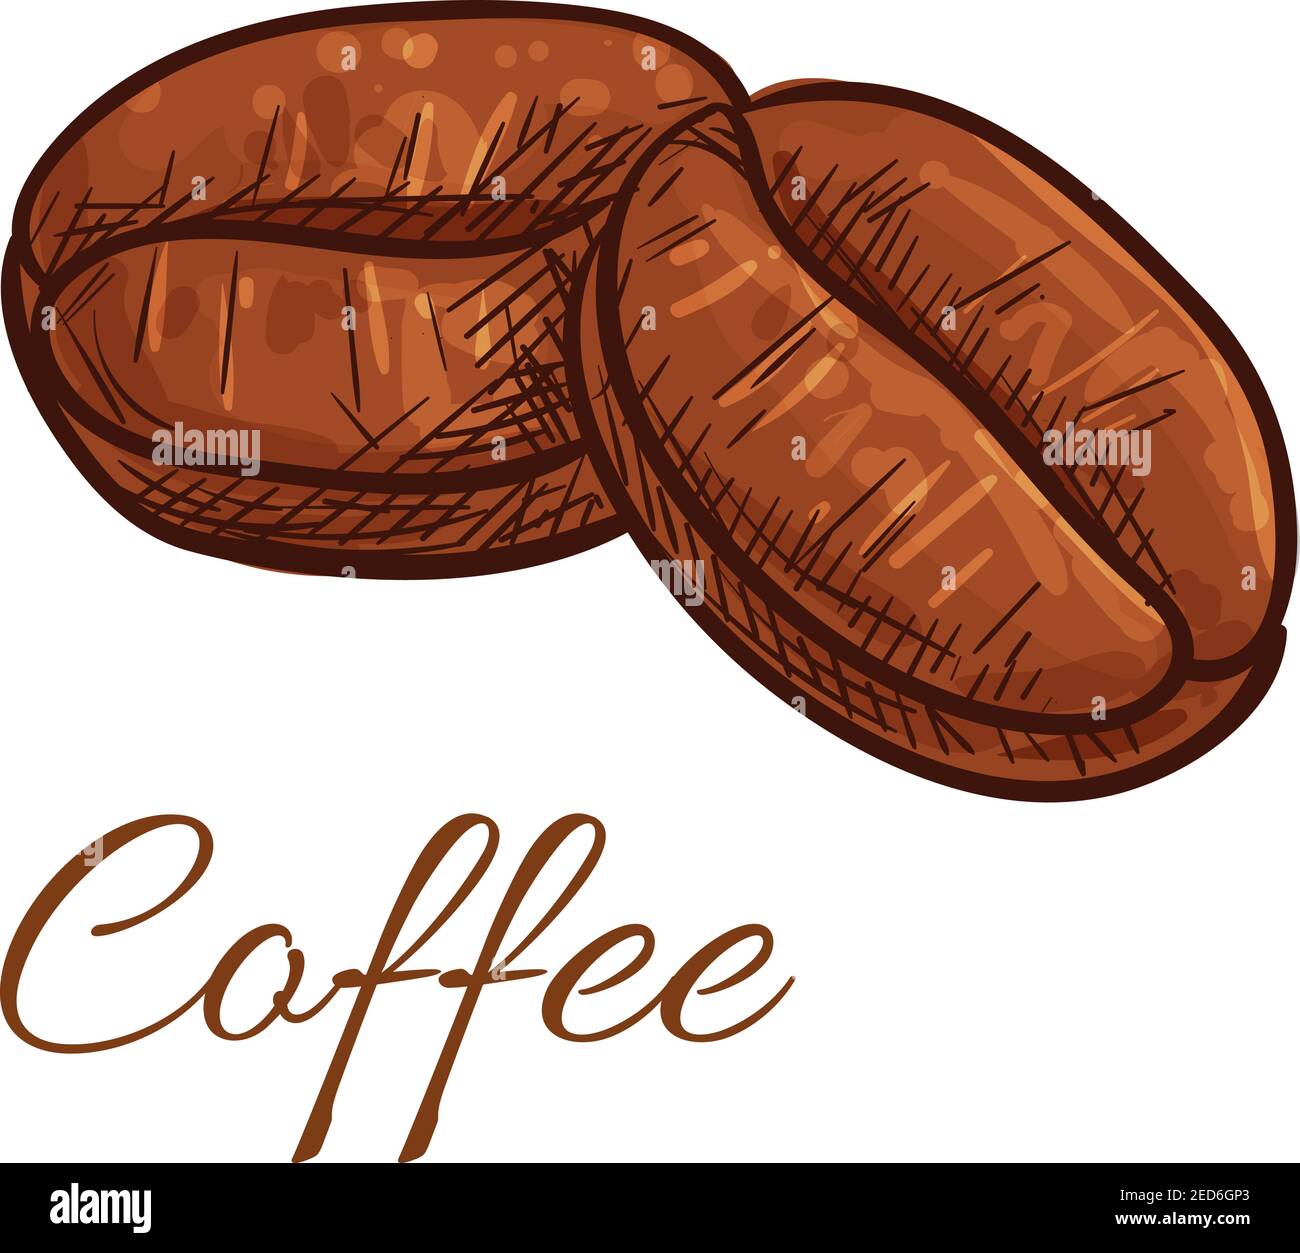 https://c8.alamy.com/comp/2ED6GP3/coffee-beans-isolated-sketch-icon-vector-color-elements-of-tasty-roasted-whole-coffee-bean-for-cafe-cafeteria-product-emblem-decoration-package-d-2ED6GP3.jpg